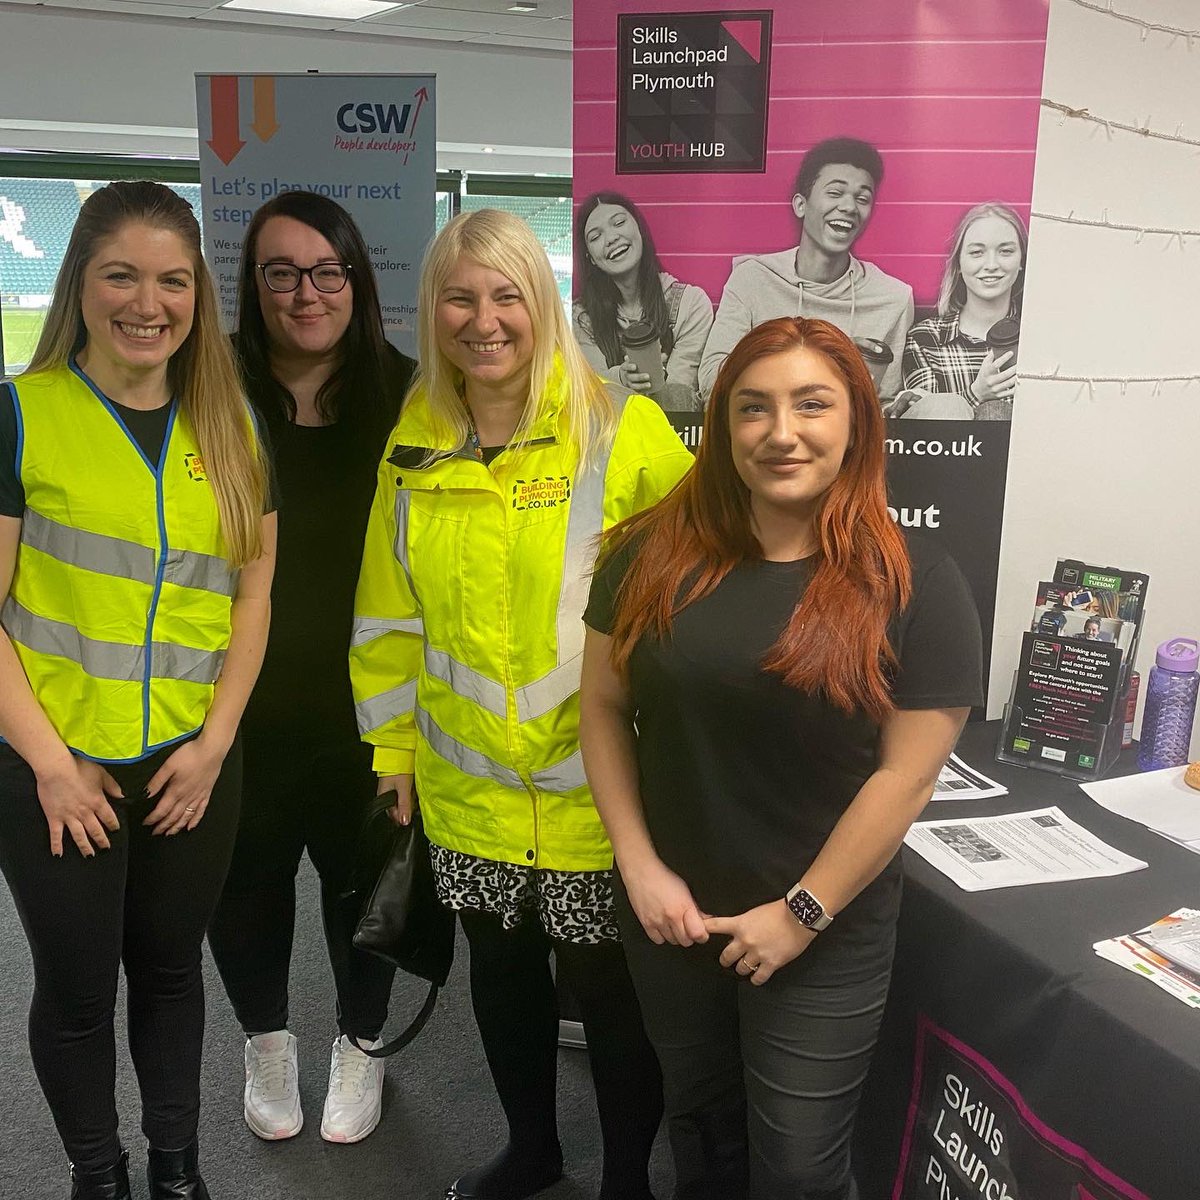 Today’s @buildplymouth and @myPMG Early Careers Fair was a great event. 

Fantastic to meet so many young people and their families at Home Park that were interested in careers in the construction, manufacturing and engineering sectors. 

#Skills4plymouth #TeamLaunchpad